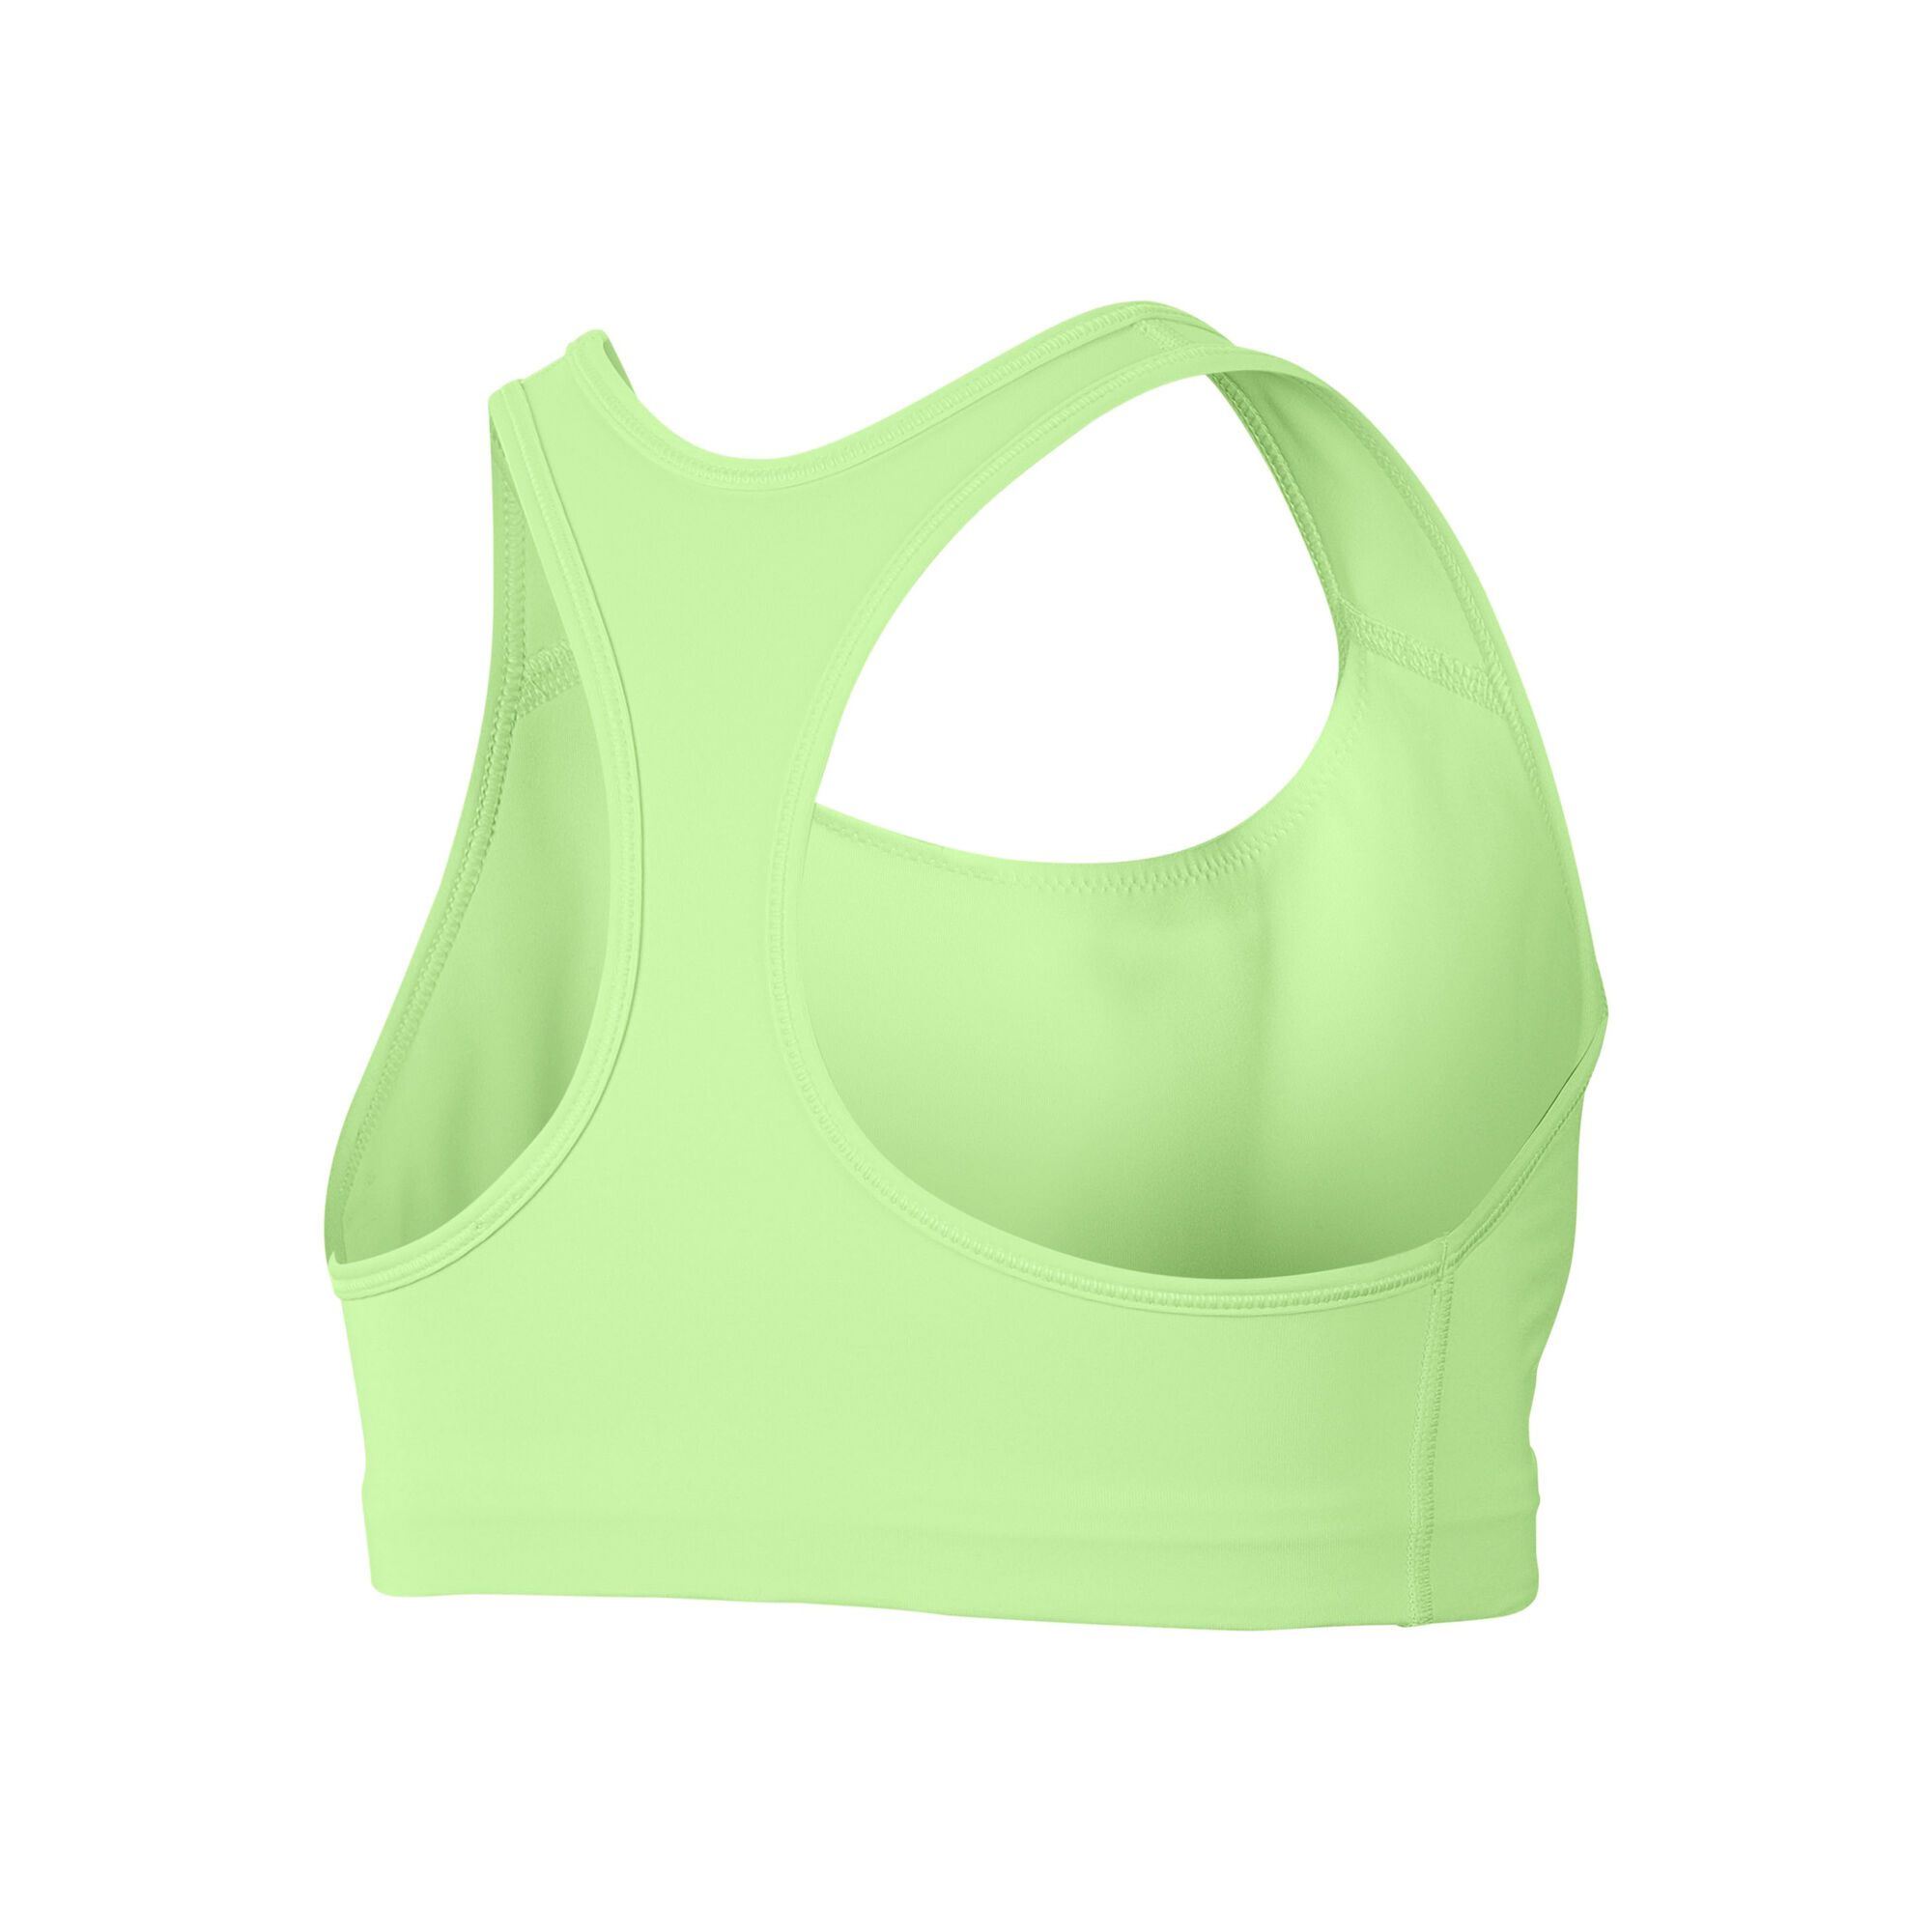 Nike Sports Bras for sale in Knoxville, Tennessee